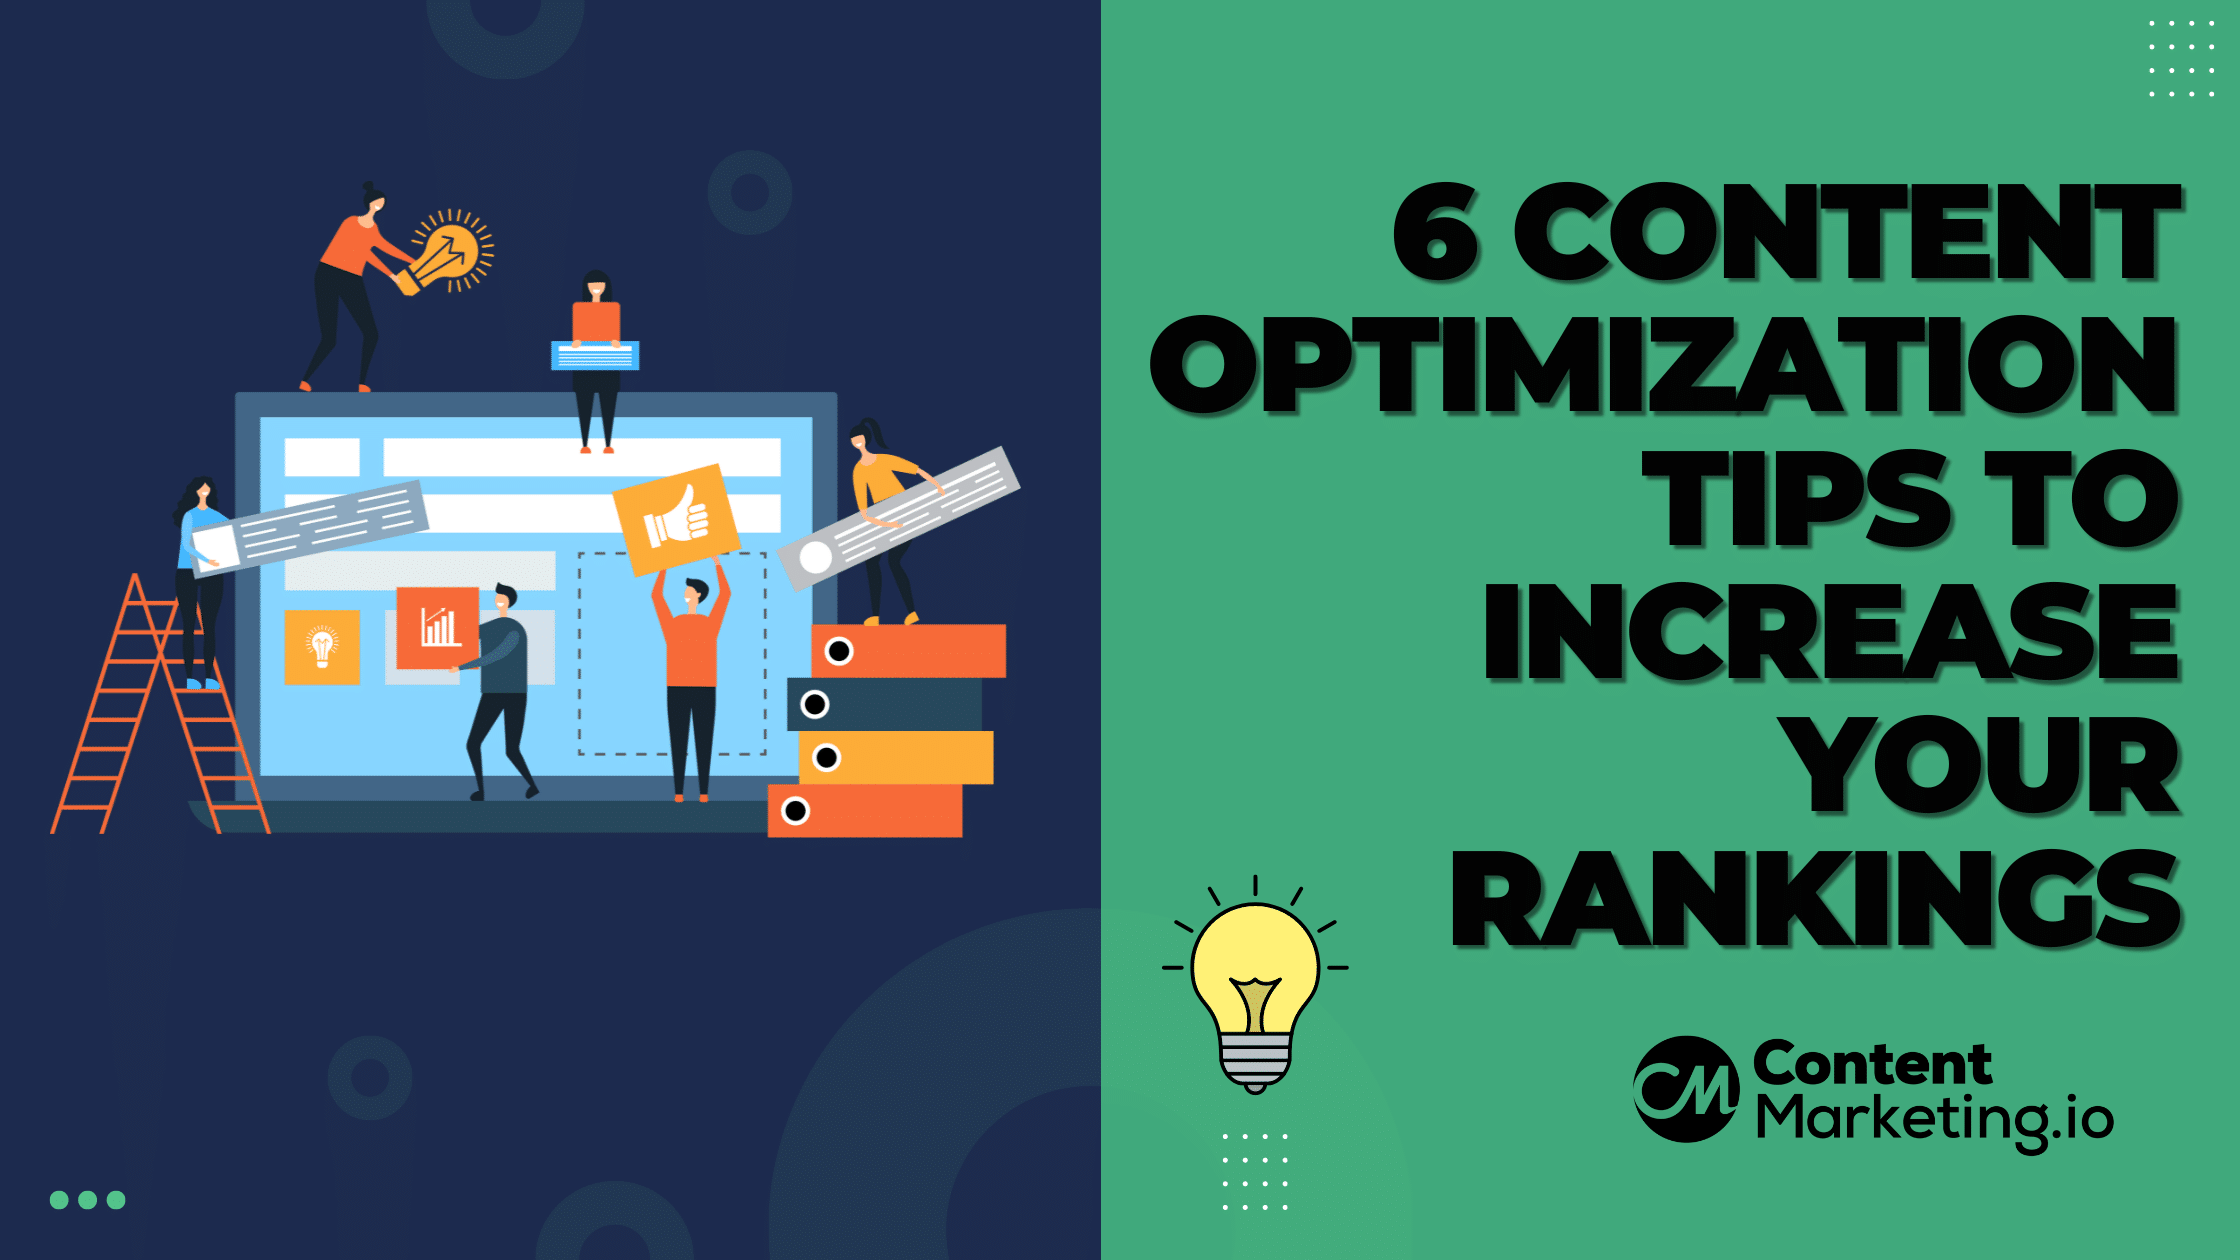 6 Content Optimization Tips To Increase Your Rankings